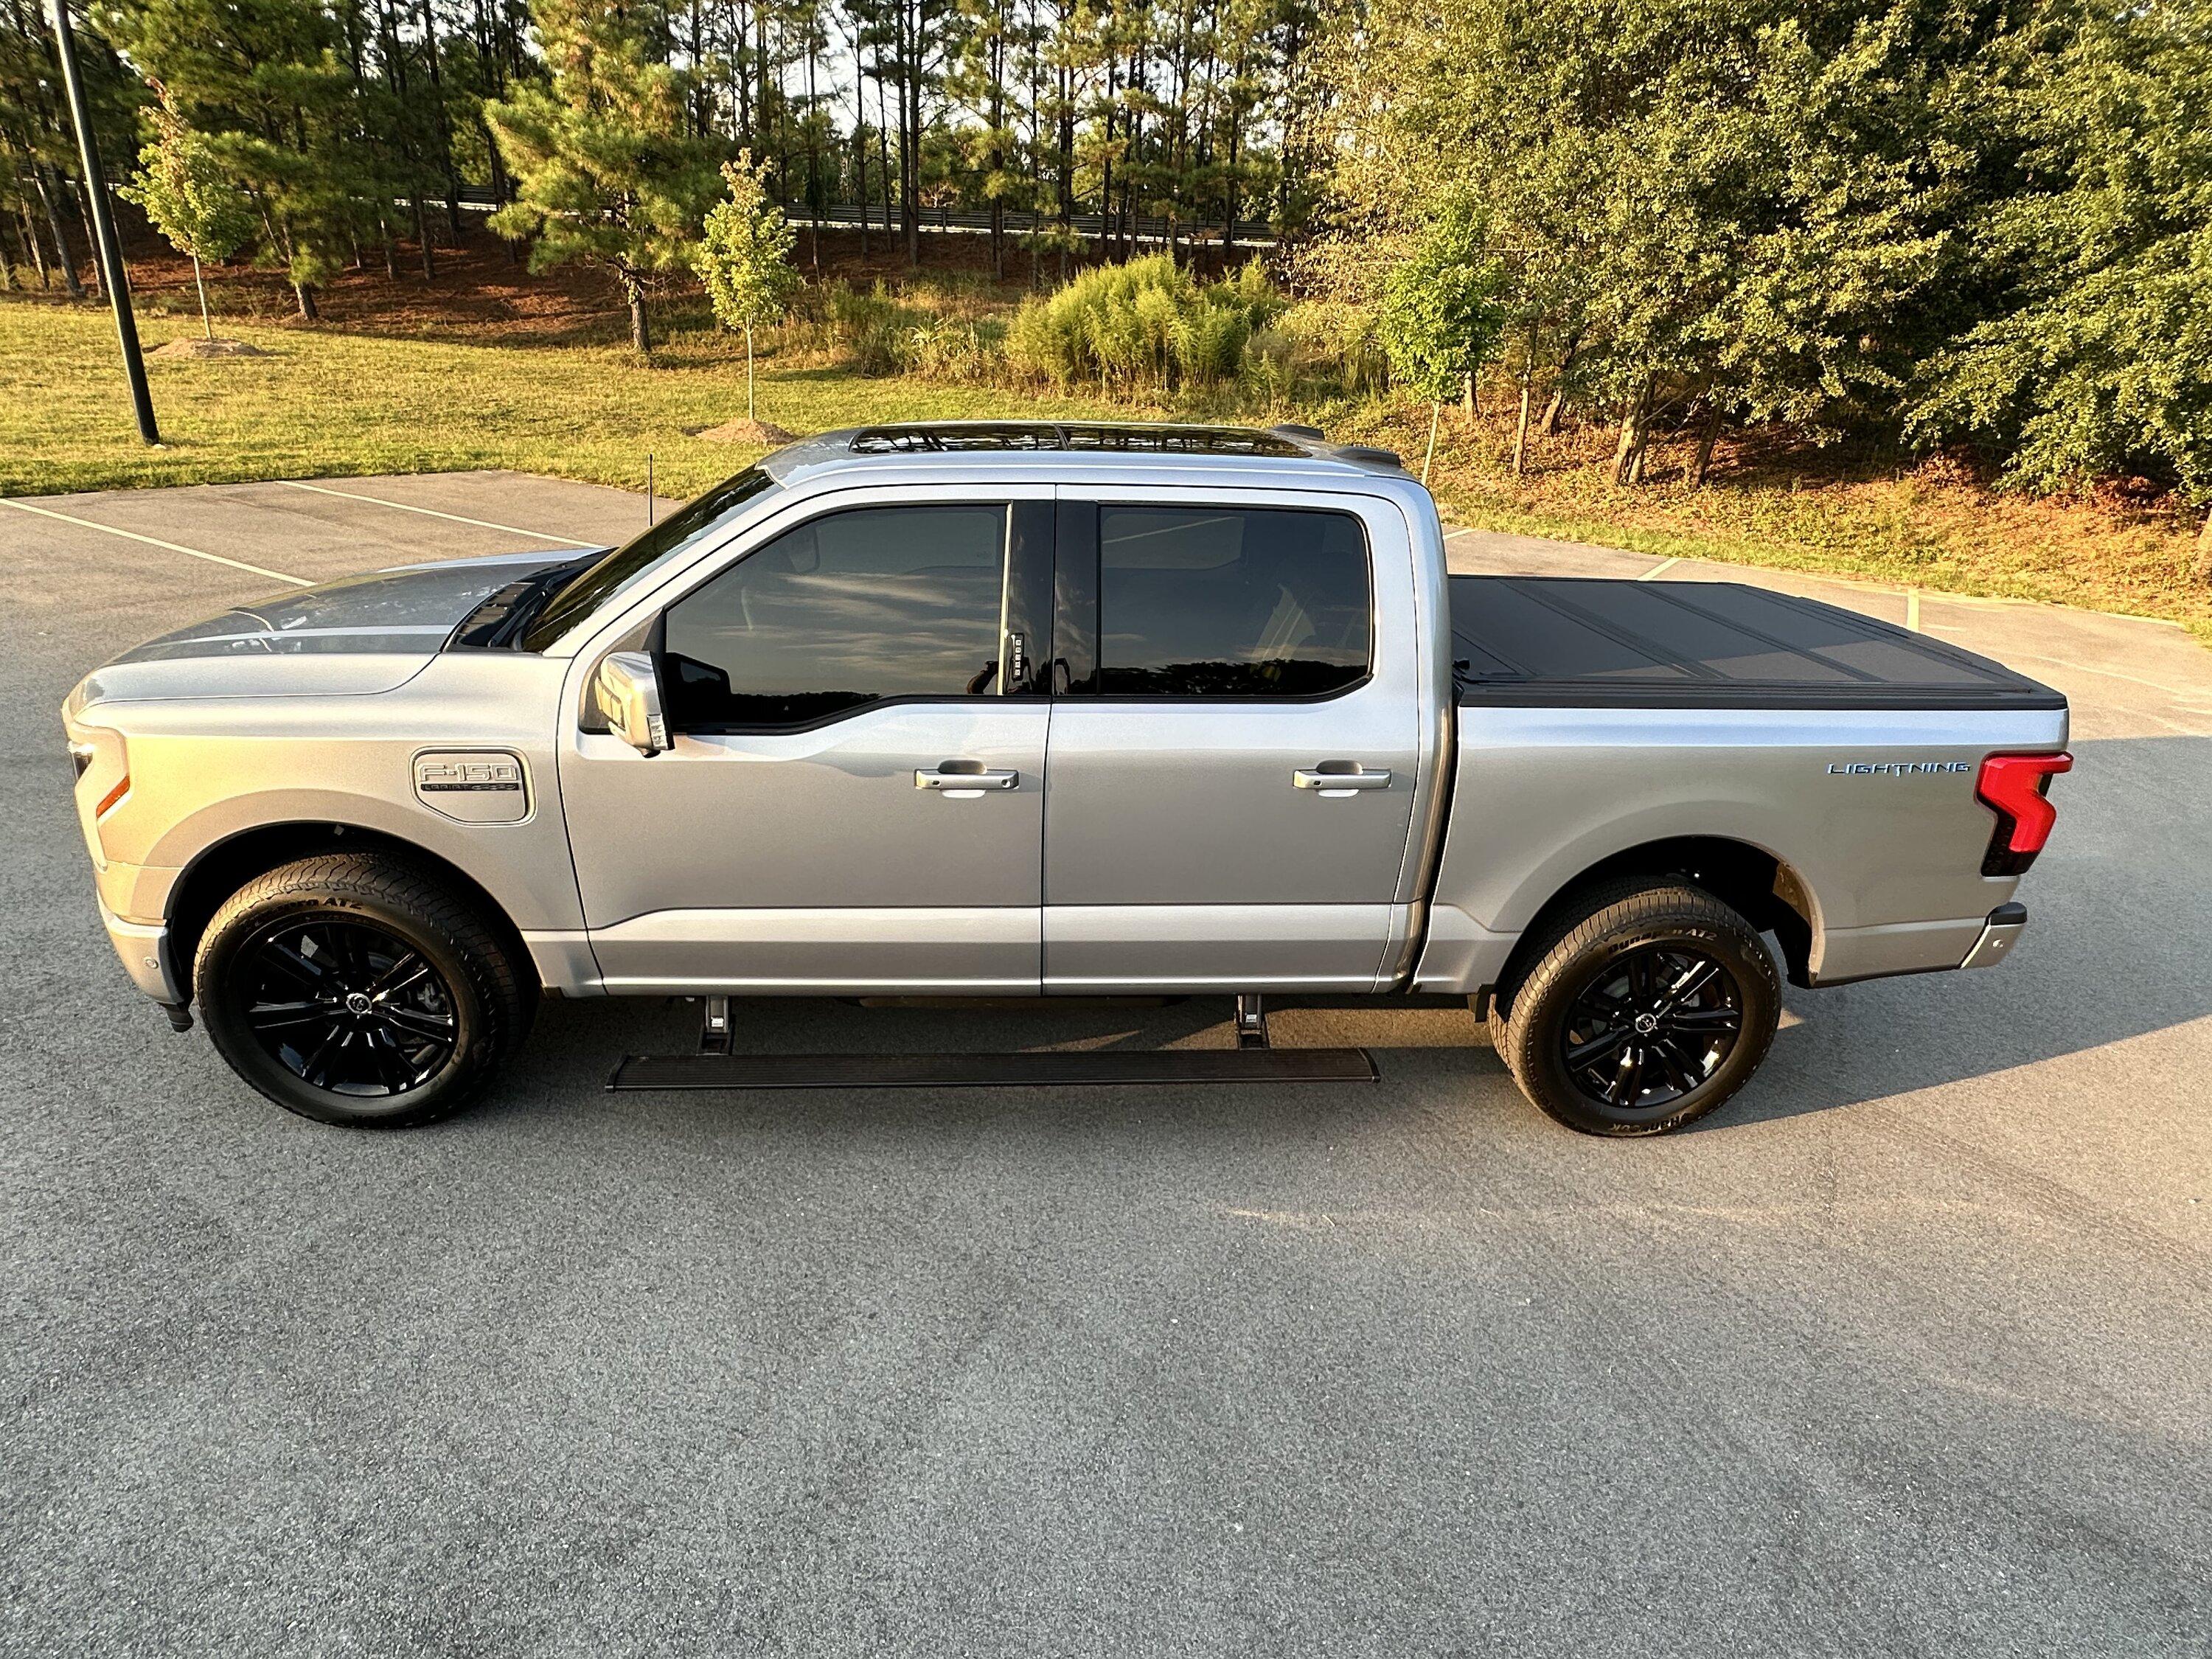 Ford F-150 Lightning Gloss black 20" wheels on my Lightning Lariat with stock AT tires, tints, AMP Power Steps 9657EAD7-B337-4DDF-A27C-CA559AF367EC